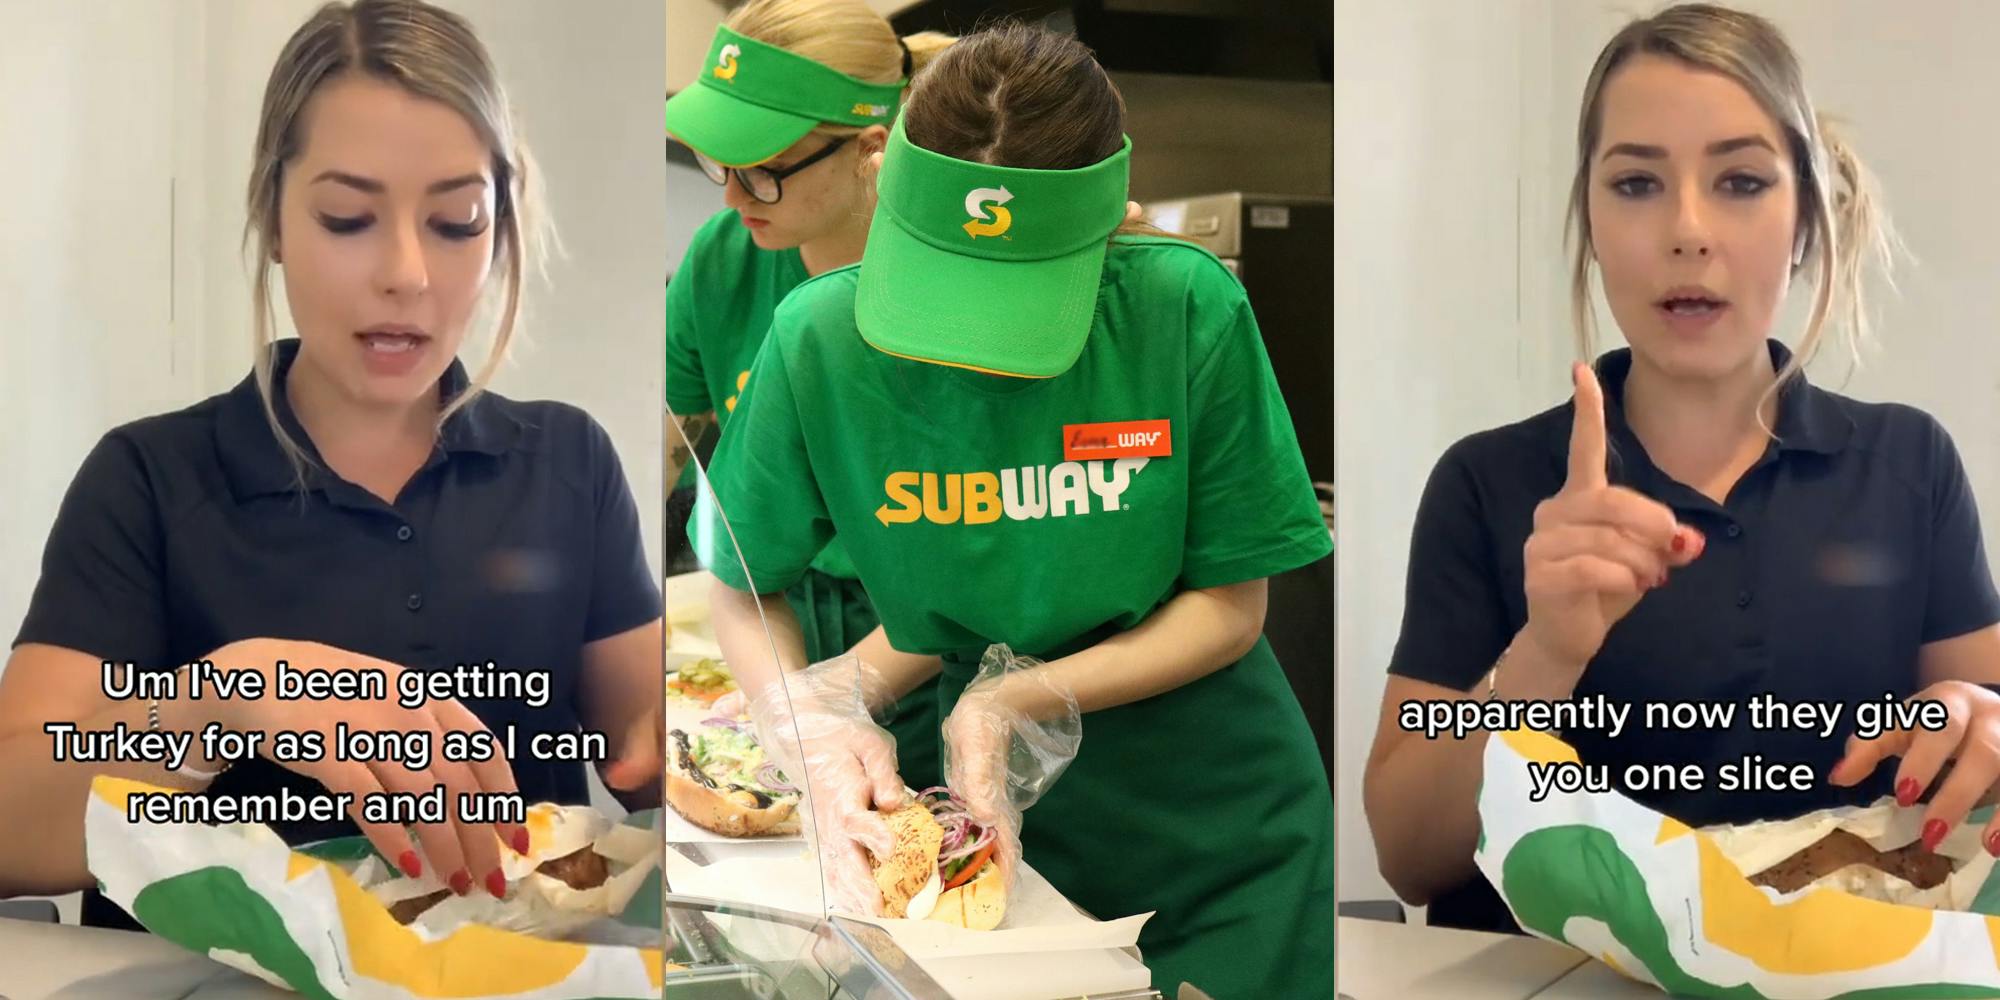 woman opening Subway sandwich speaking caption "Um I've been getting Turkey for as long as I can remember and um" (l) Subway worker making sandwich (c) woman speaking with finger up while opening Subway sandwich caption "apparently now they give you one slice" (r)